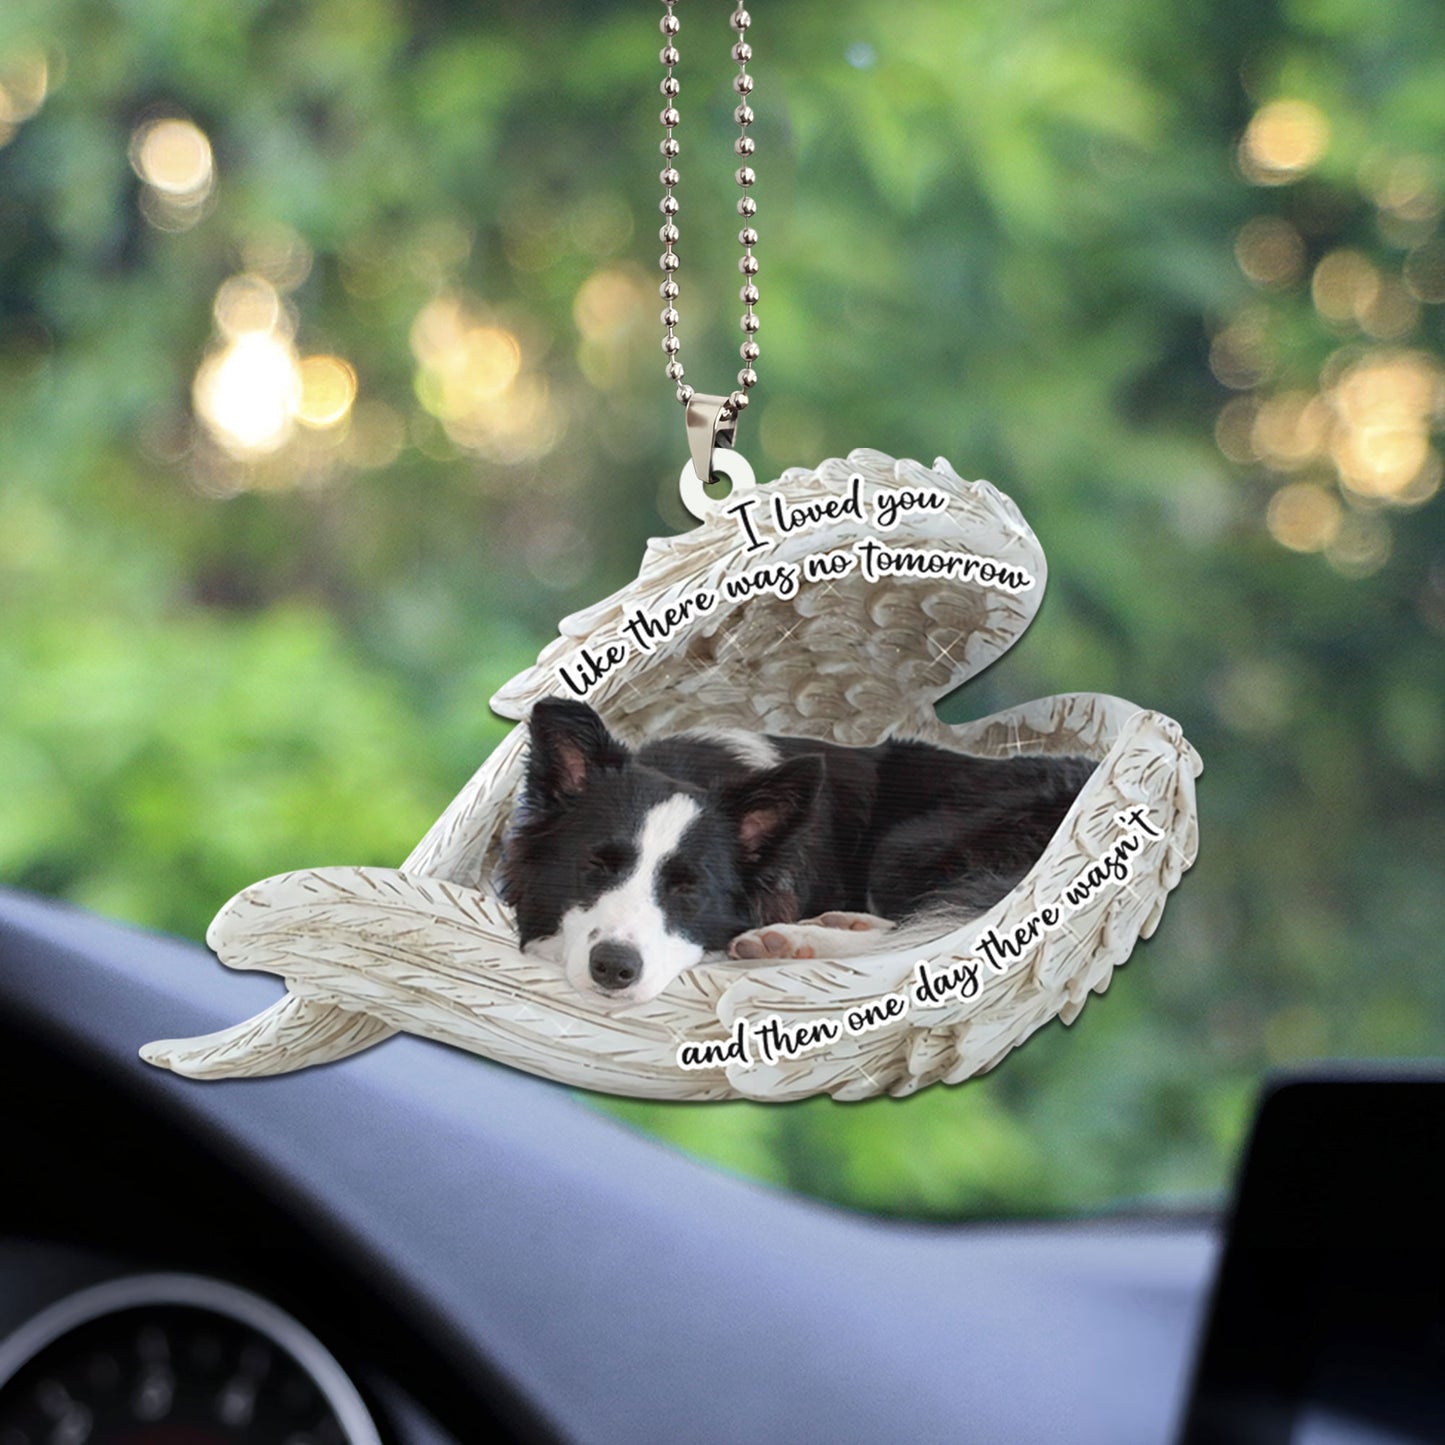 Border Collie Sleeping Angel Personalizedwitch Flat Car Ornament